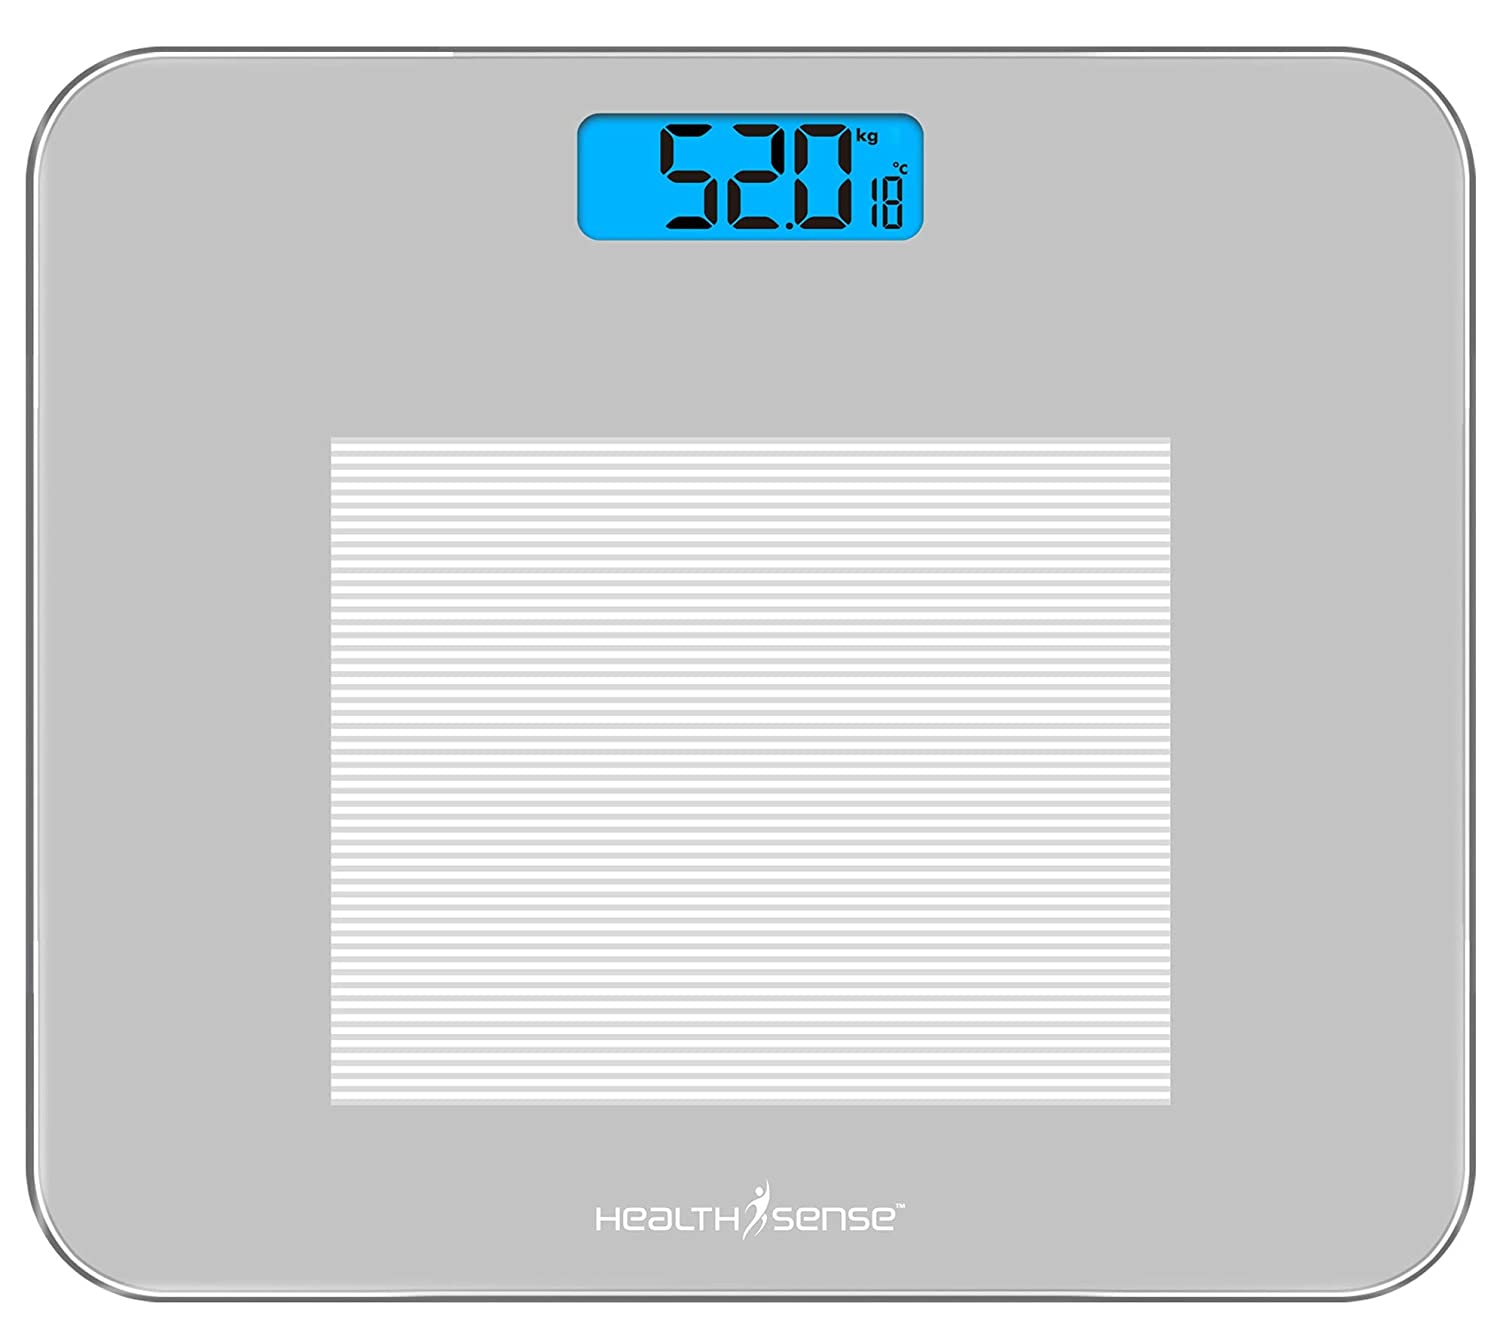 HealthSense Dura-Glass PS 115 Digital Personal Body Weighing Scale, Best Electronic Bathroom Scales